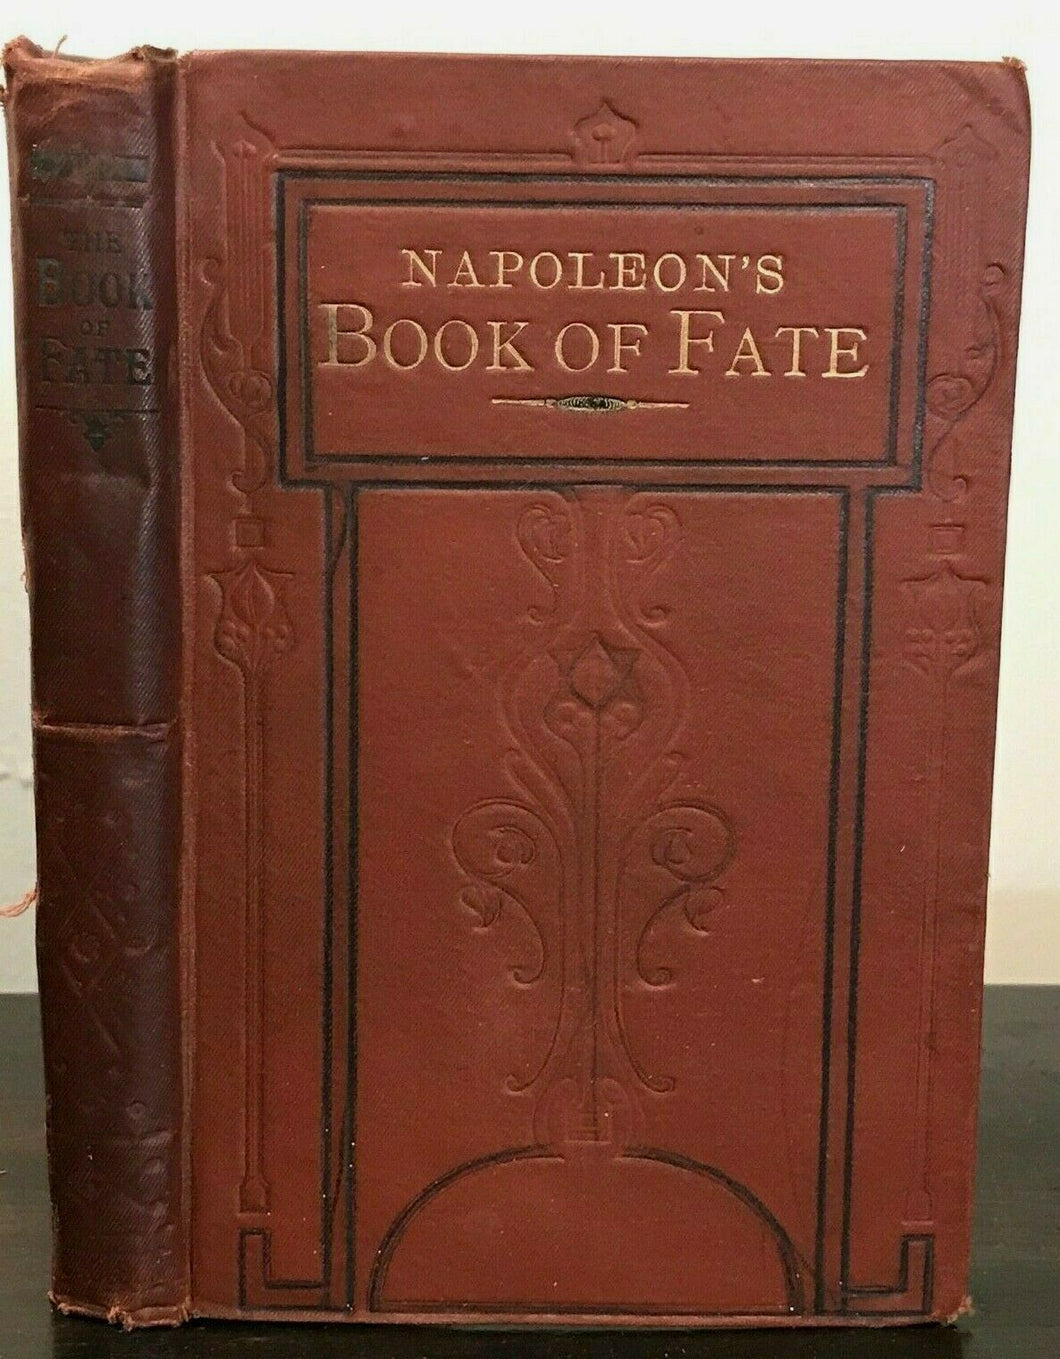 NAPOLEON'S BOOK OF FATE AND ORACULUM, 1900 - ASTROLOGY PALMISTRY OMENS ...